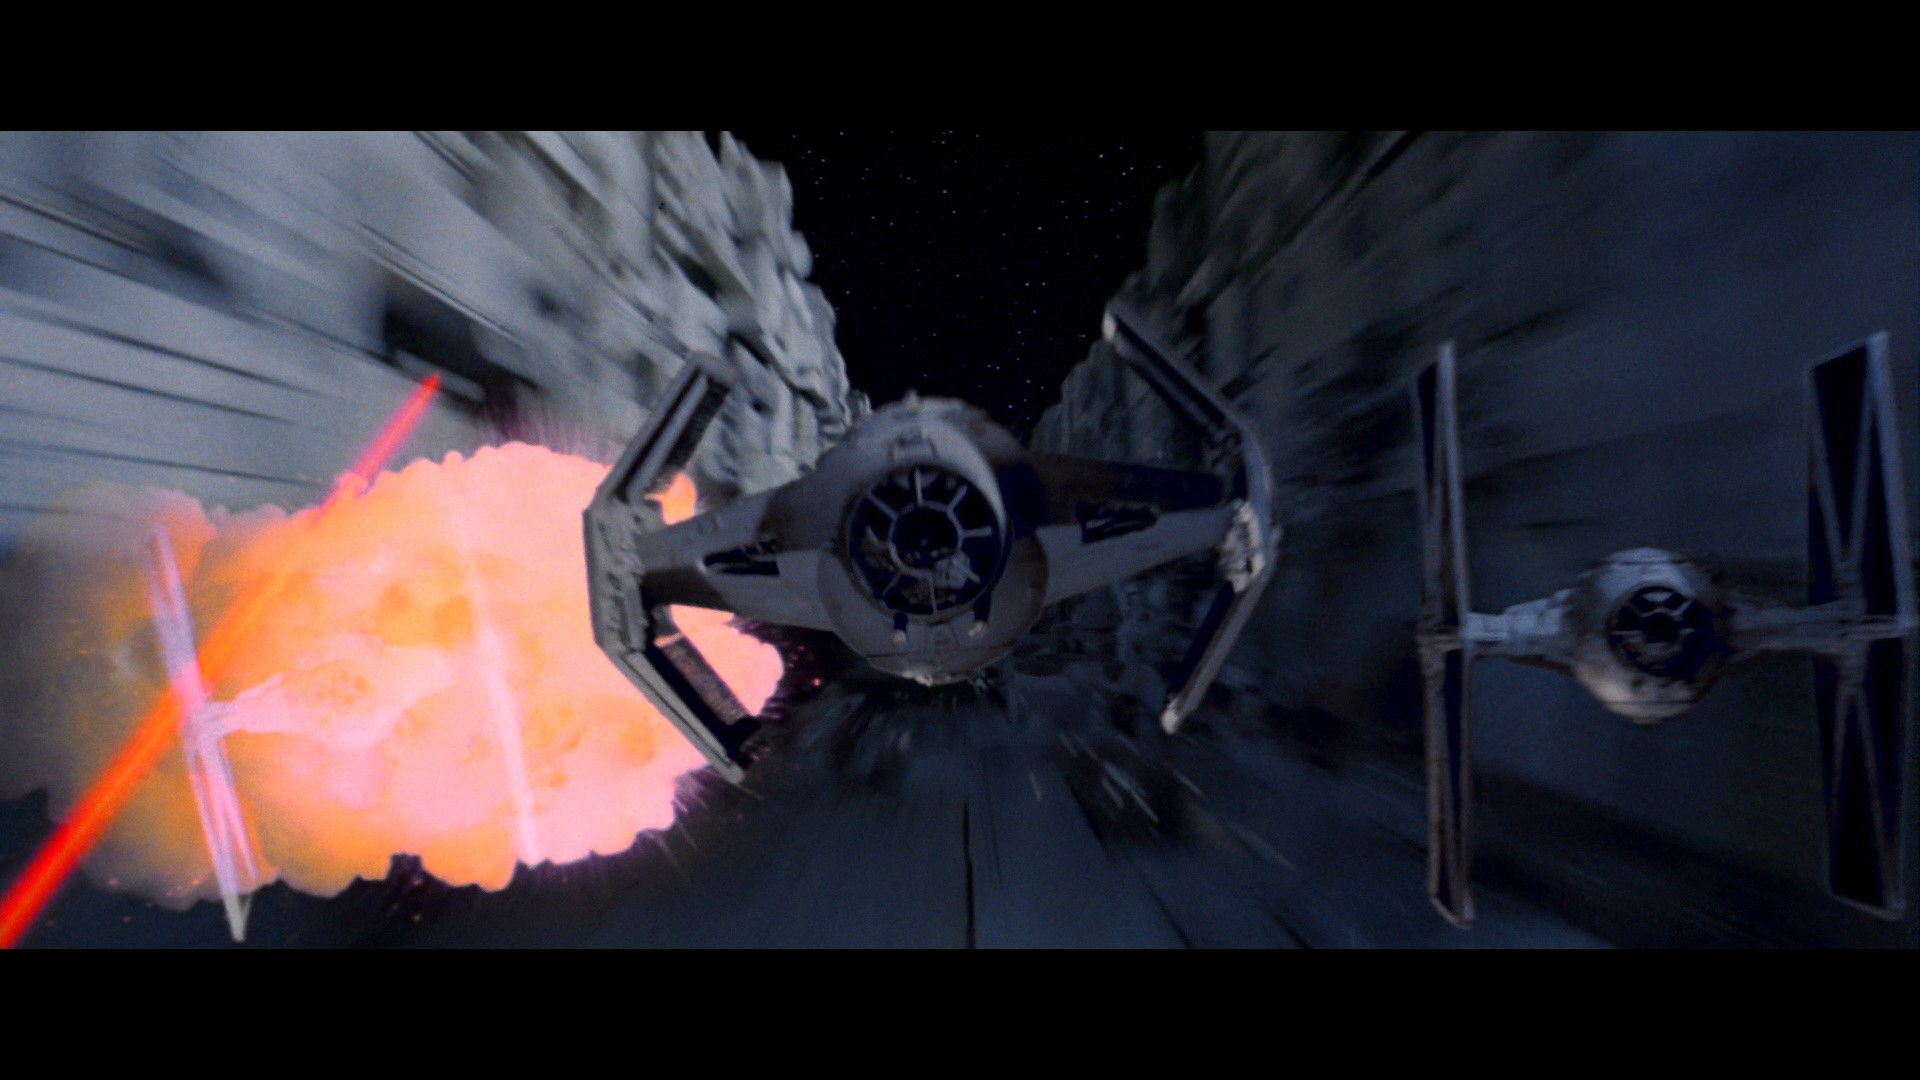 STAR WARS: A NEW HOPE (1977) - Exploded Pyrotechnic TIE Fighter Wing Structure Component - Image 6 of 7